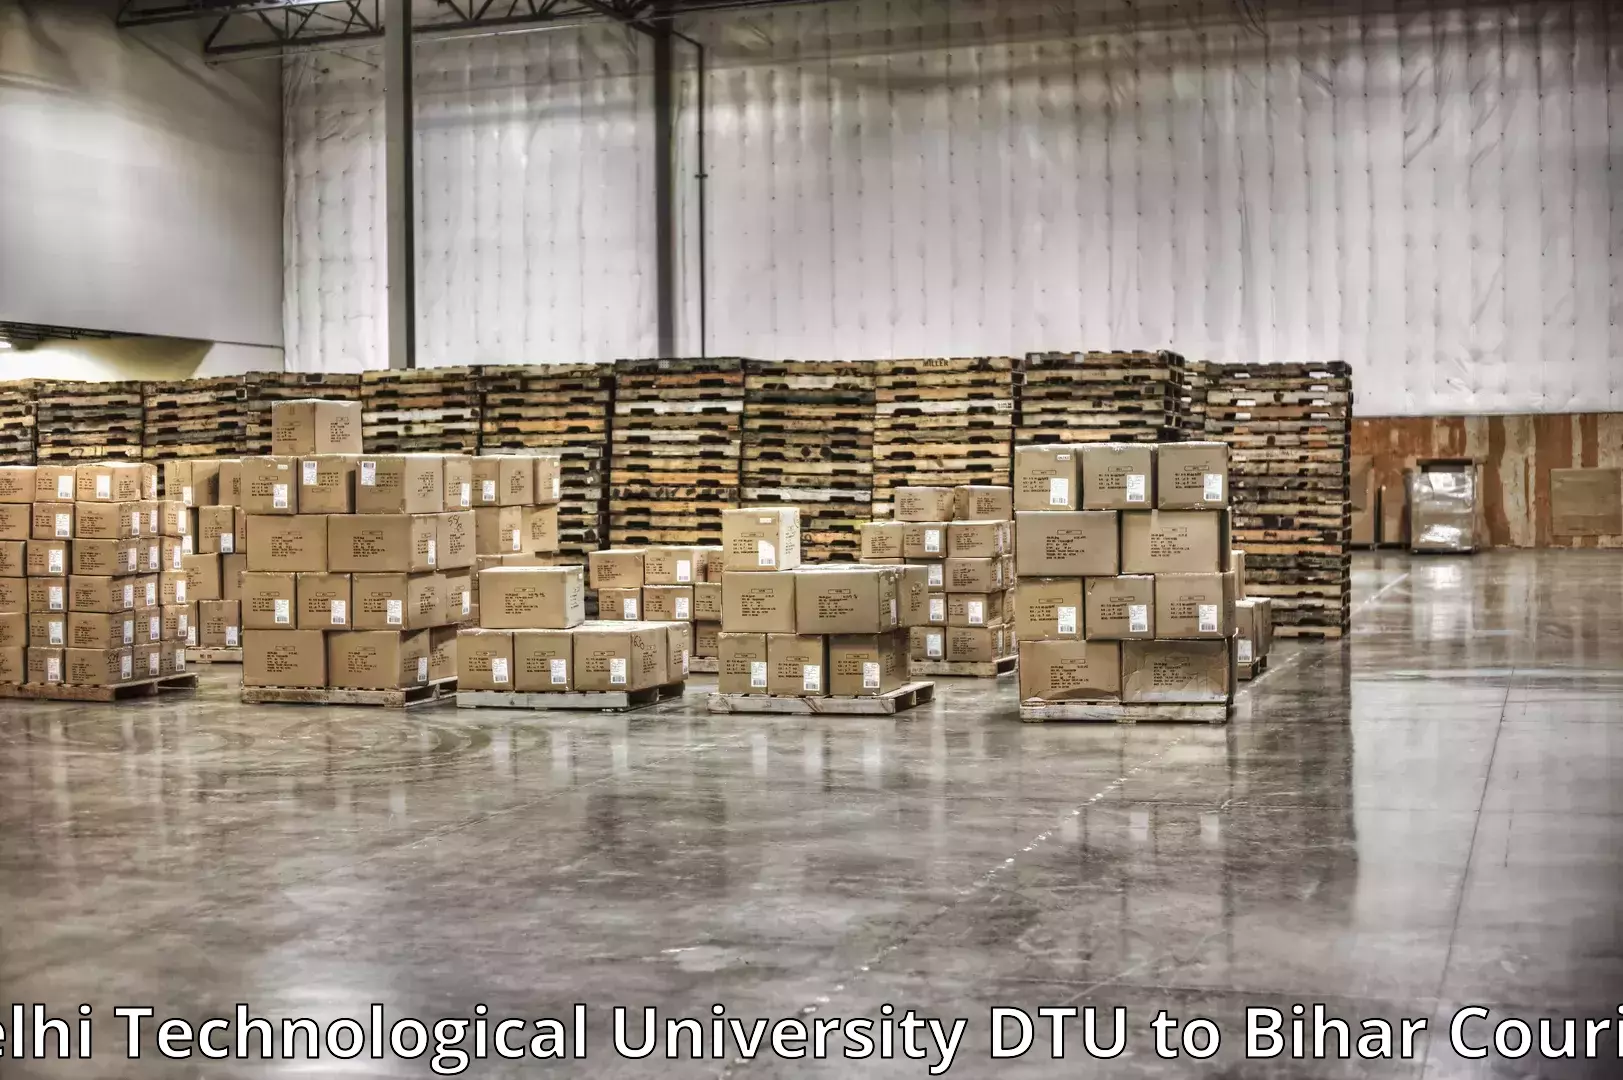 Furniture transport services in Delhi Technological University DTU to Rohtas